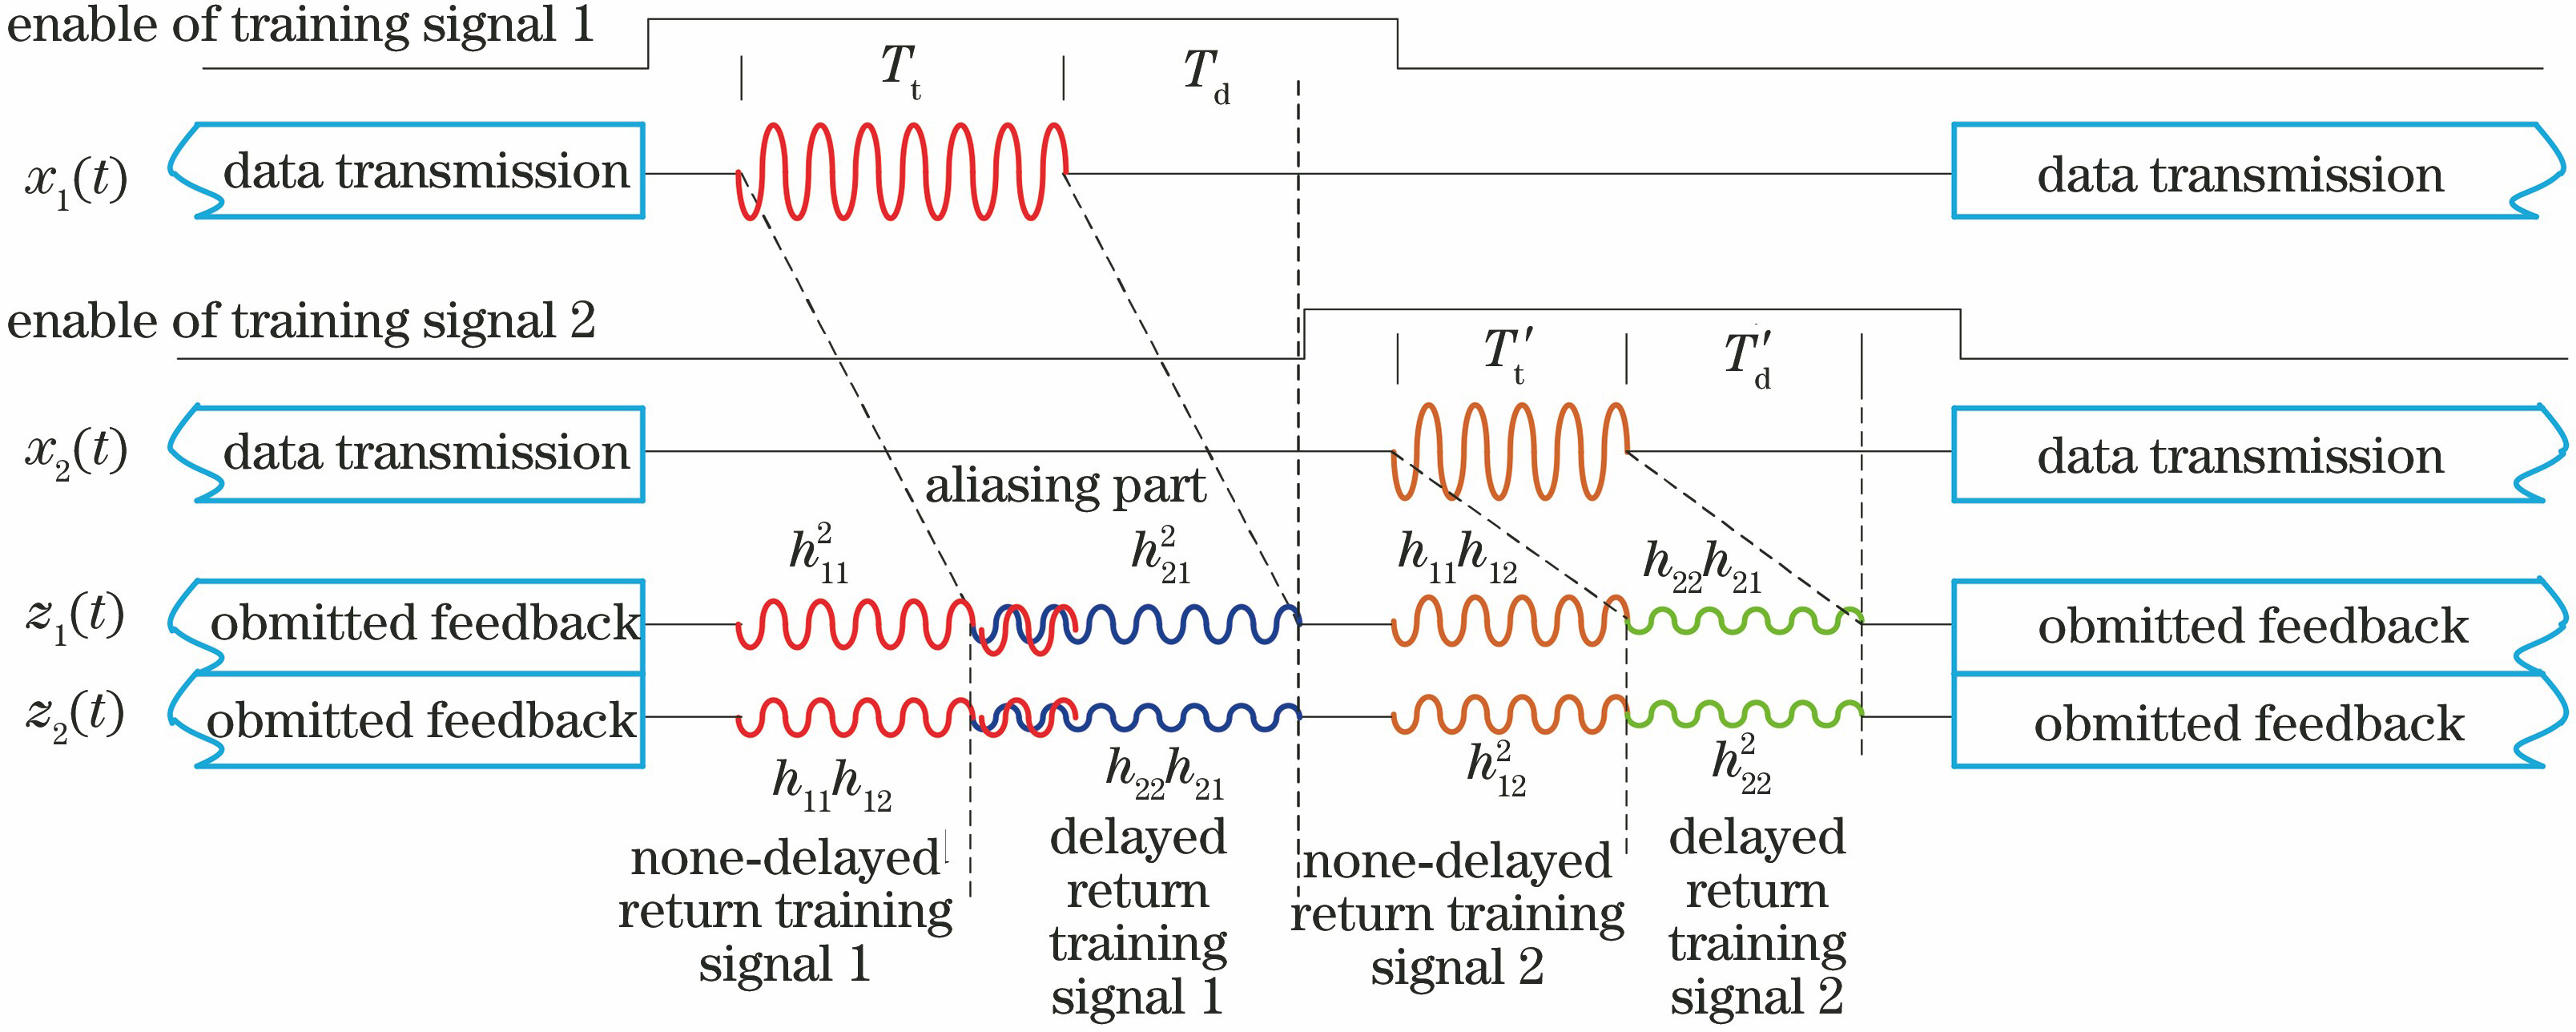 Schematic of data transmission and training signal